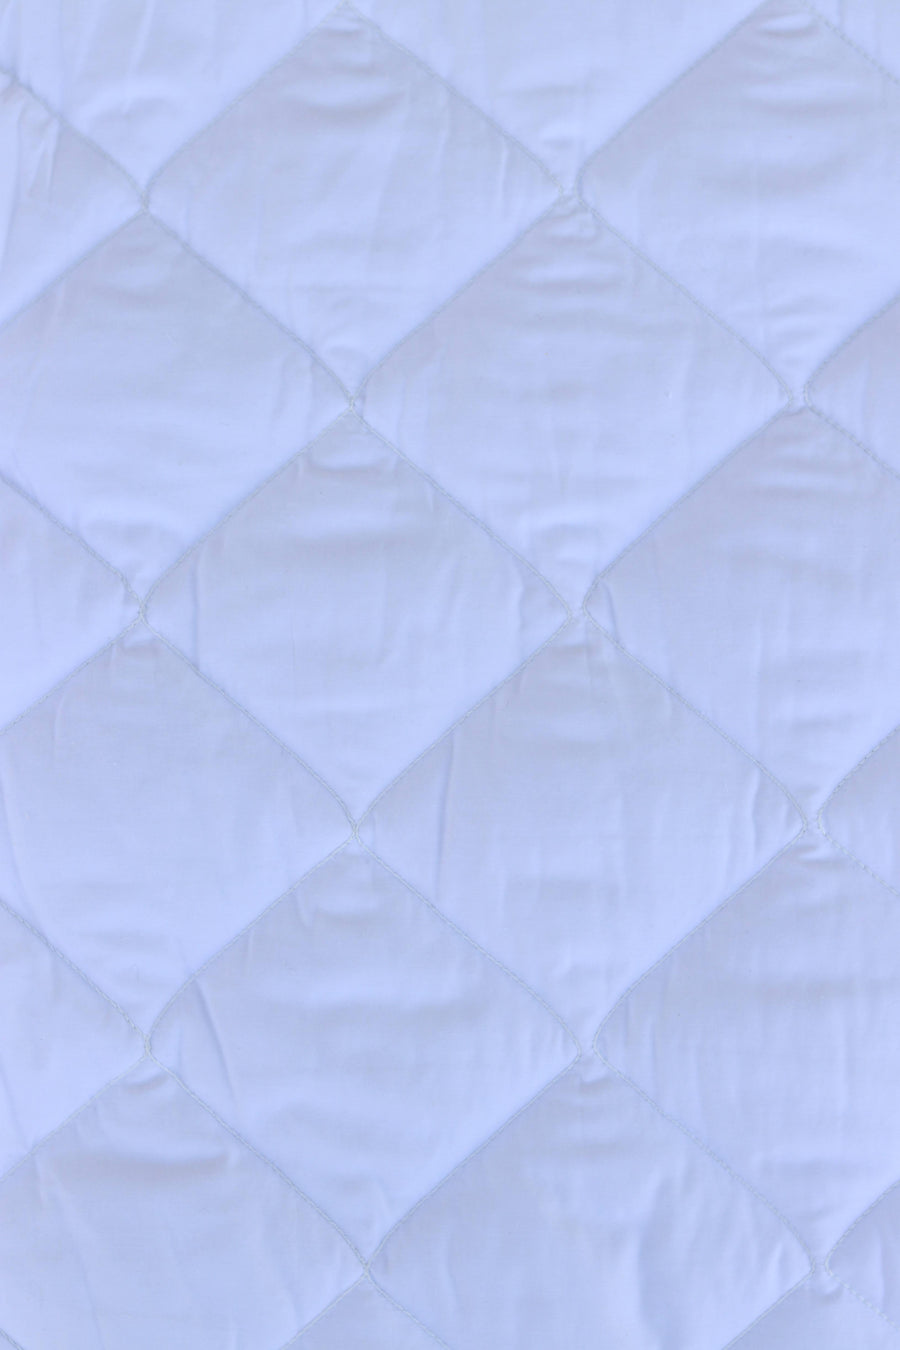 Cotton Quilted Mattress Pads, Waterbed